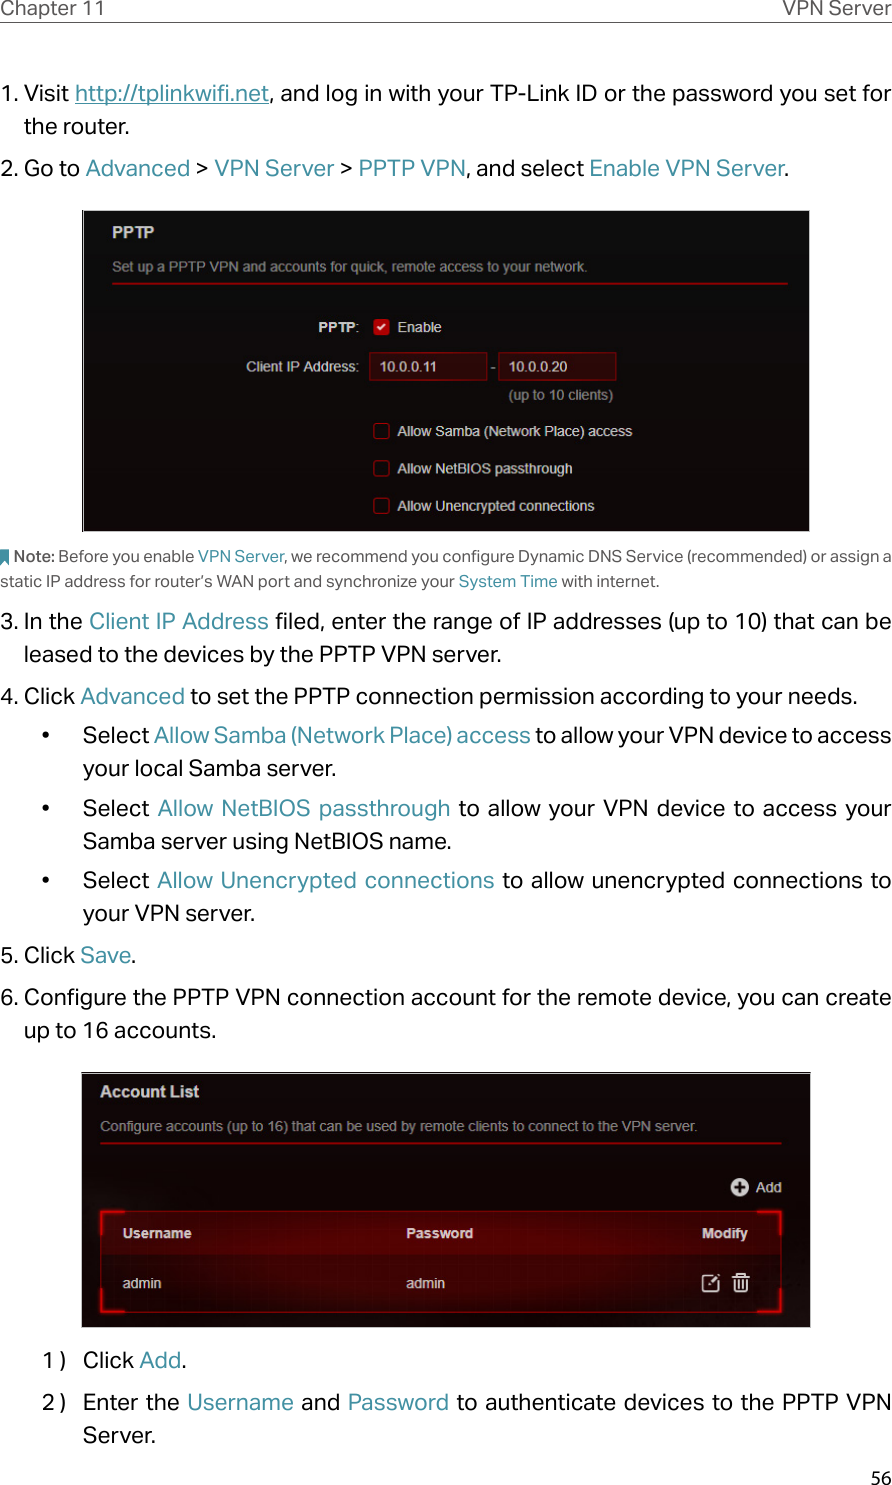 56Chapter 11 VPN Server1. Visit http://tplinkwifi.net, and log in with your TP-Link ID or the password you set for the router.2. Go to Advanced &gt; VPN Server &gt; PPTP VPN, and select Enable VPN Server.Note: Before you enable VPN Server, we recommend you configure Dynamic DNS Service (recommended) or assign a static IP address for router’s WAN port and synchronize your System Time with internet.3. In the Client IP Address filed, enter the range of IP addresses (up to 10) that can be leased to the devices by the PPTP VPN server.4. Click Advanced to set the PPTP connection permission according to your needs.•  Select Allow Samba (Network Place) access to allow your VPN device to access your local Samba server.•  Select  Allow NetBIOS passthrough to allow your VPN device to access your Samba server using NetBIOS name.•  Select Allow Unencrypted connections to allow unencrypted connections to your VPN server.5. Click Save.6. Configure the PPTP VPN connection account for the remote device, you can create up to 16 accounts.1 )  Click Add.2 )  Enter the Username and Password to authenticate devices to the PPTP VPN Server.